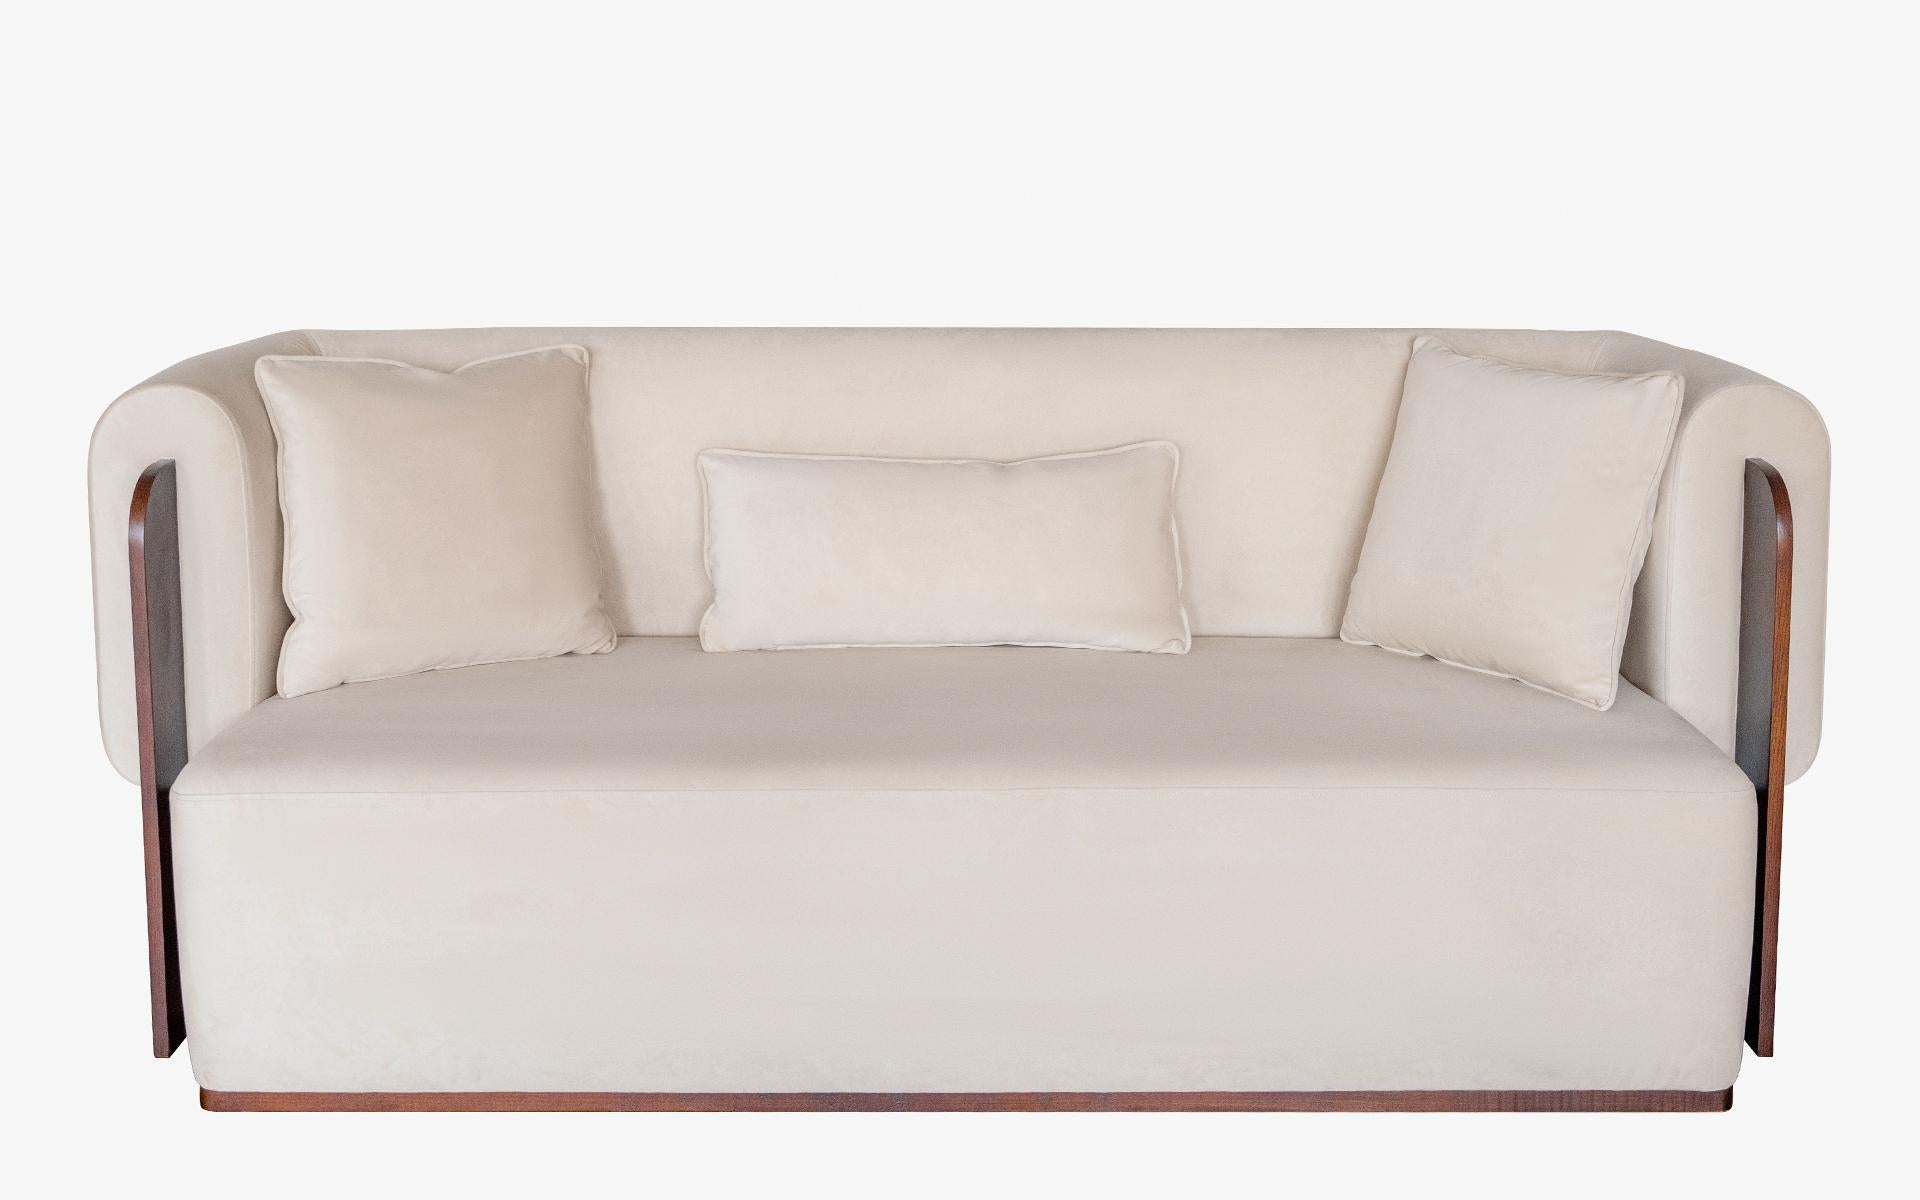 Baika Beige Velvet Three Seater Sofa with Wooden Detail In New Condition For Sale In İSTANBUL, TR